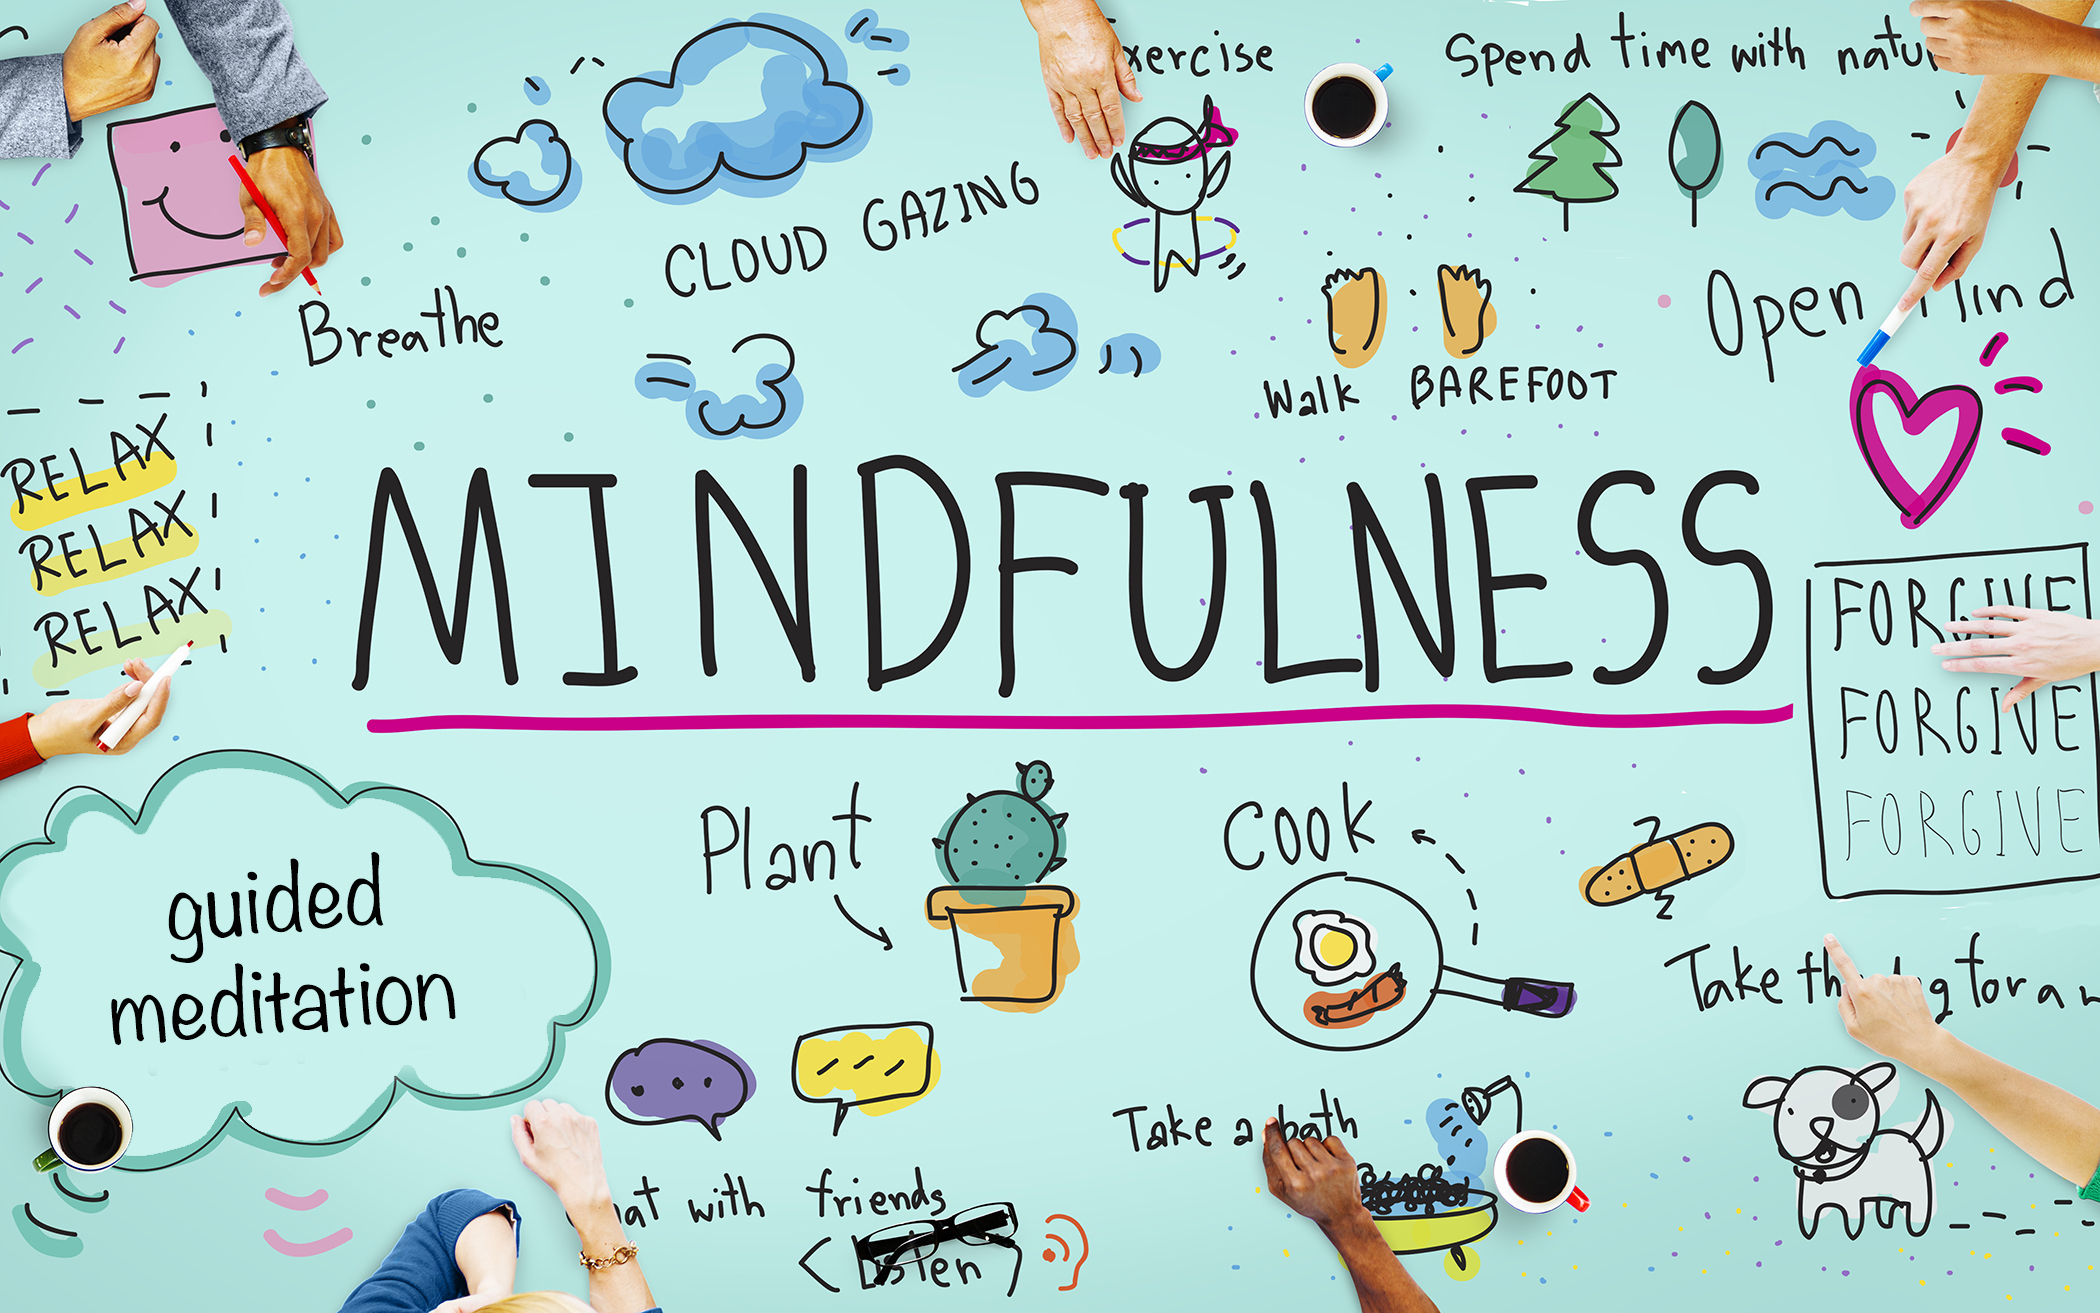 MINDFULNESS- LIVING IN THE PRESENT.